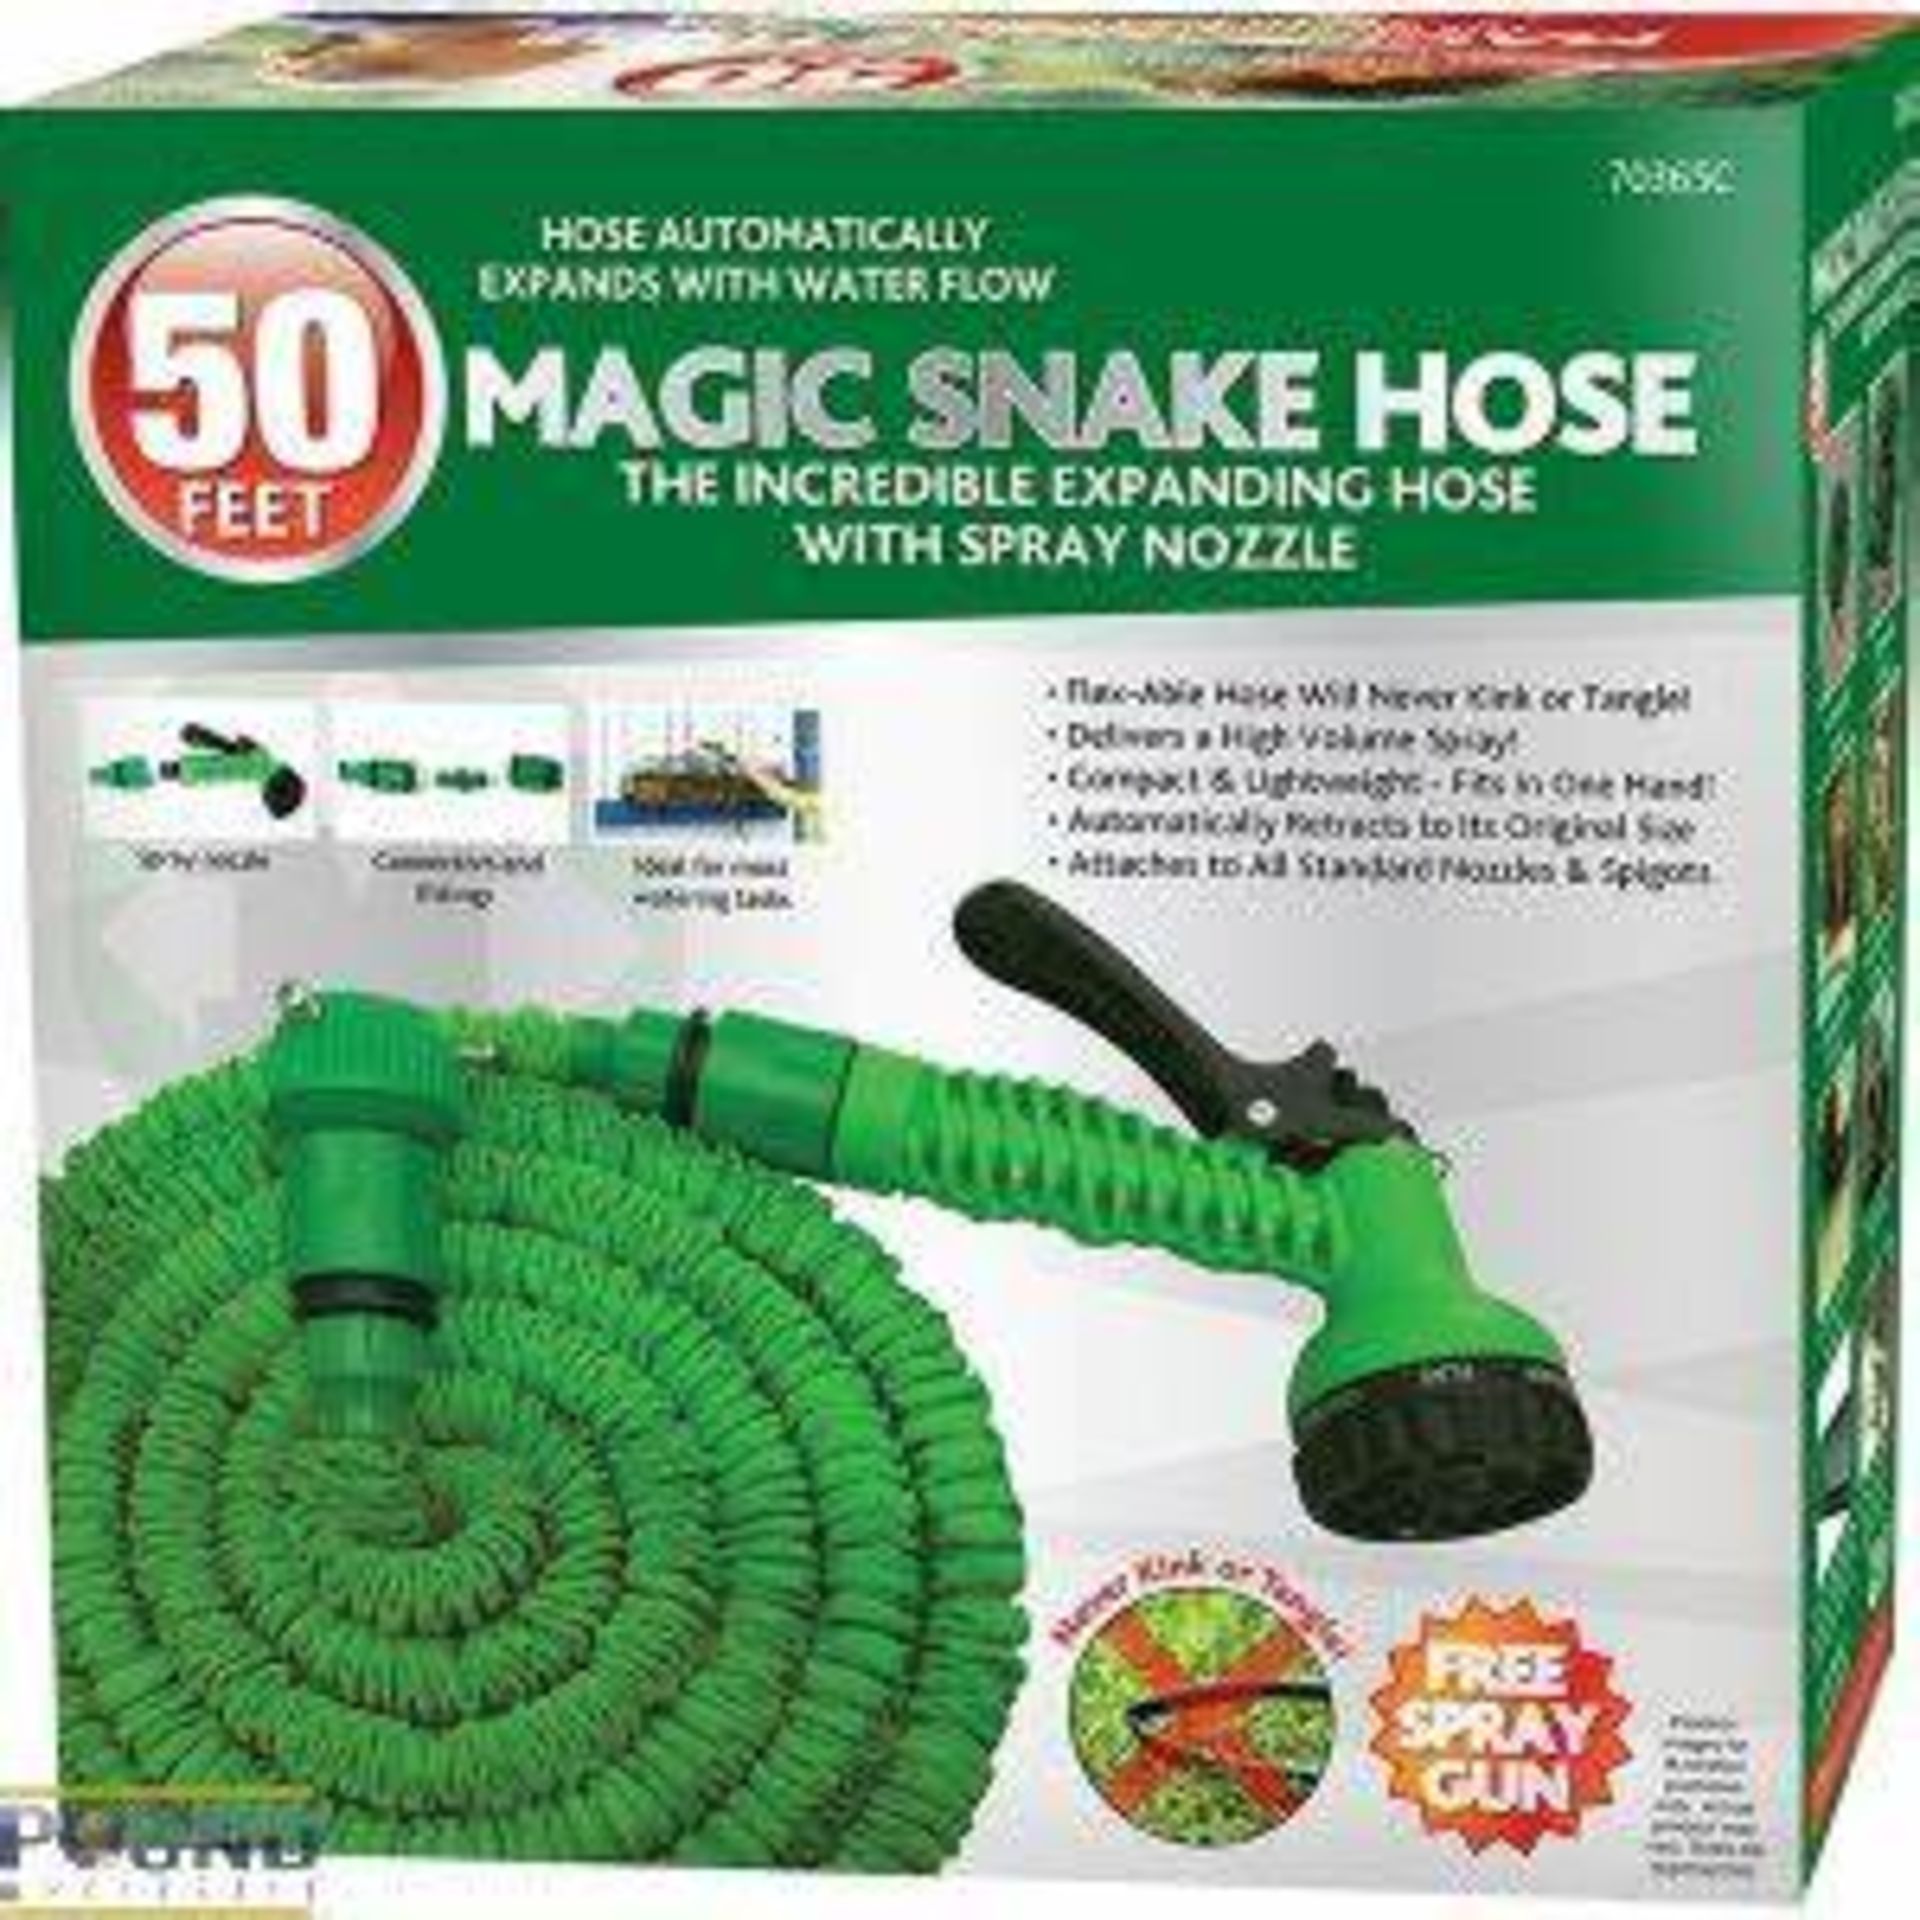 NEW 50FT MAGIC EXPANDING HOSE WITH SPRAY GUN HEAD - Image 2 of 2